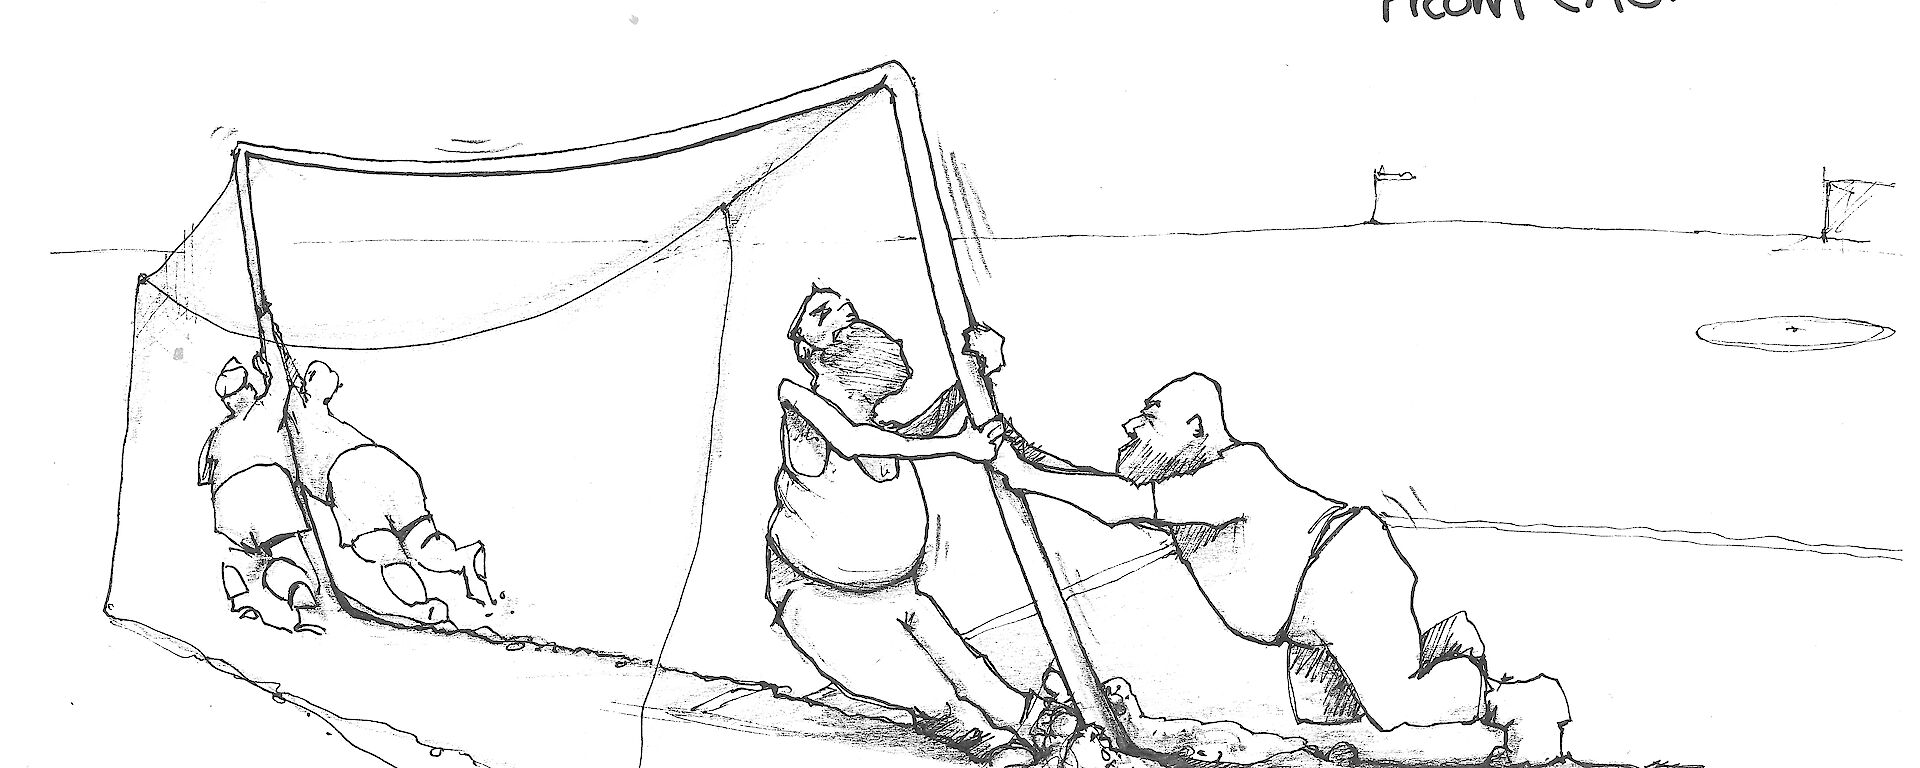 Cartoon illustration of expeditioners struggling to erect a soccer goal